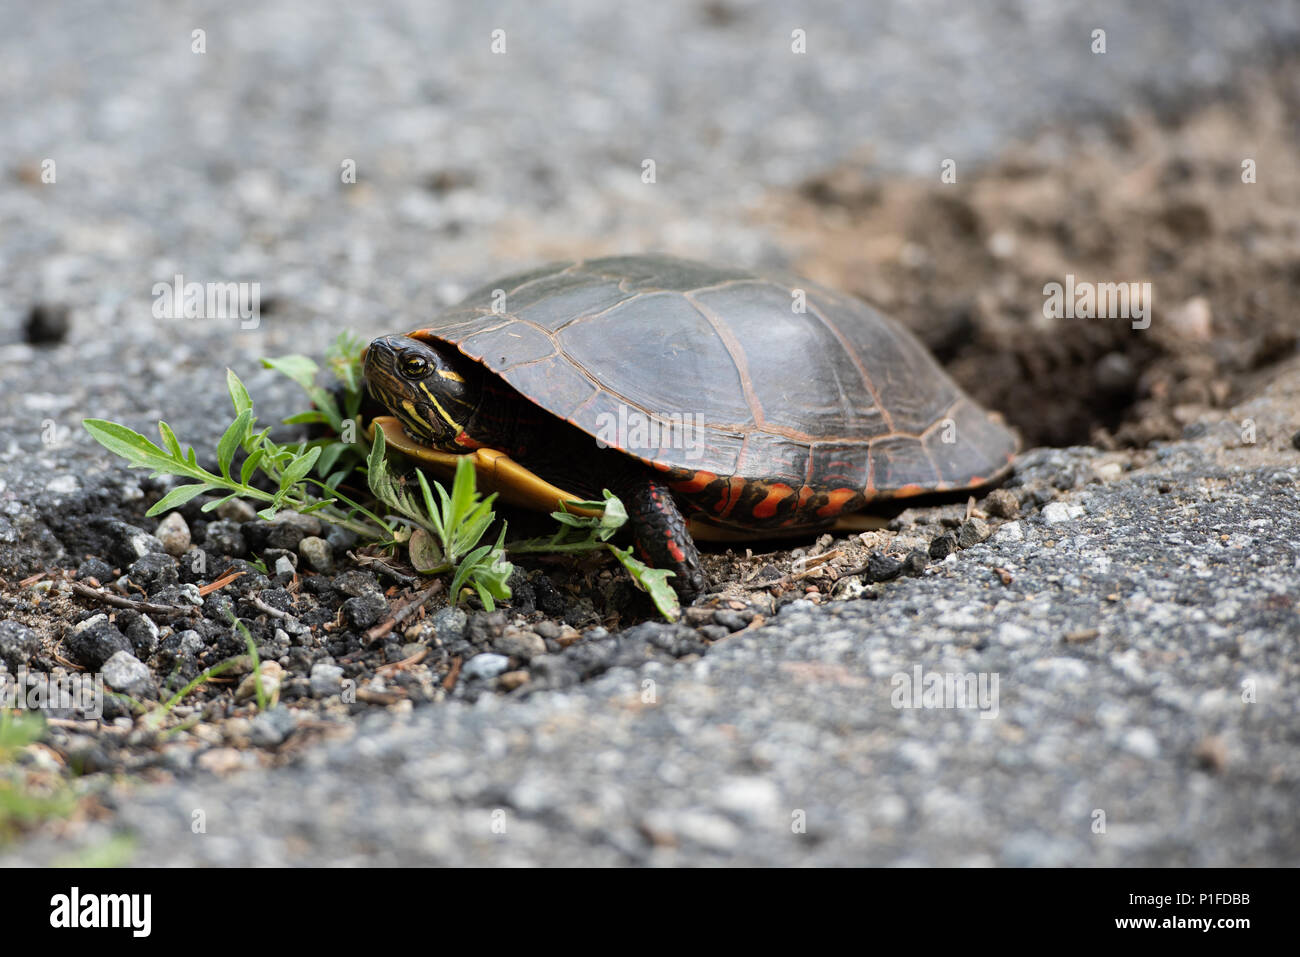 A painted turtle,  Chrysemys picta, digging a hole in the dirt in a crack of an old highway to lay her eggs in the Adirondack Mountains, NY USA Stock Photo